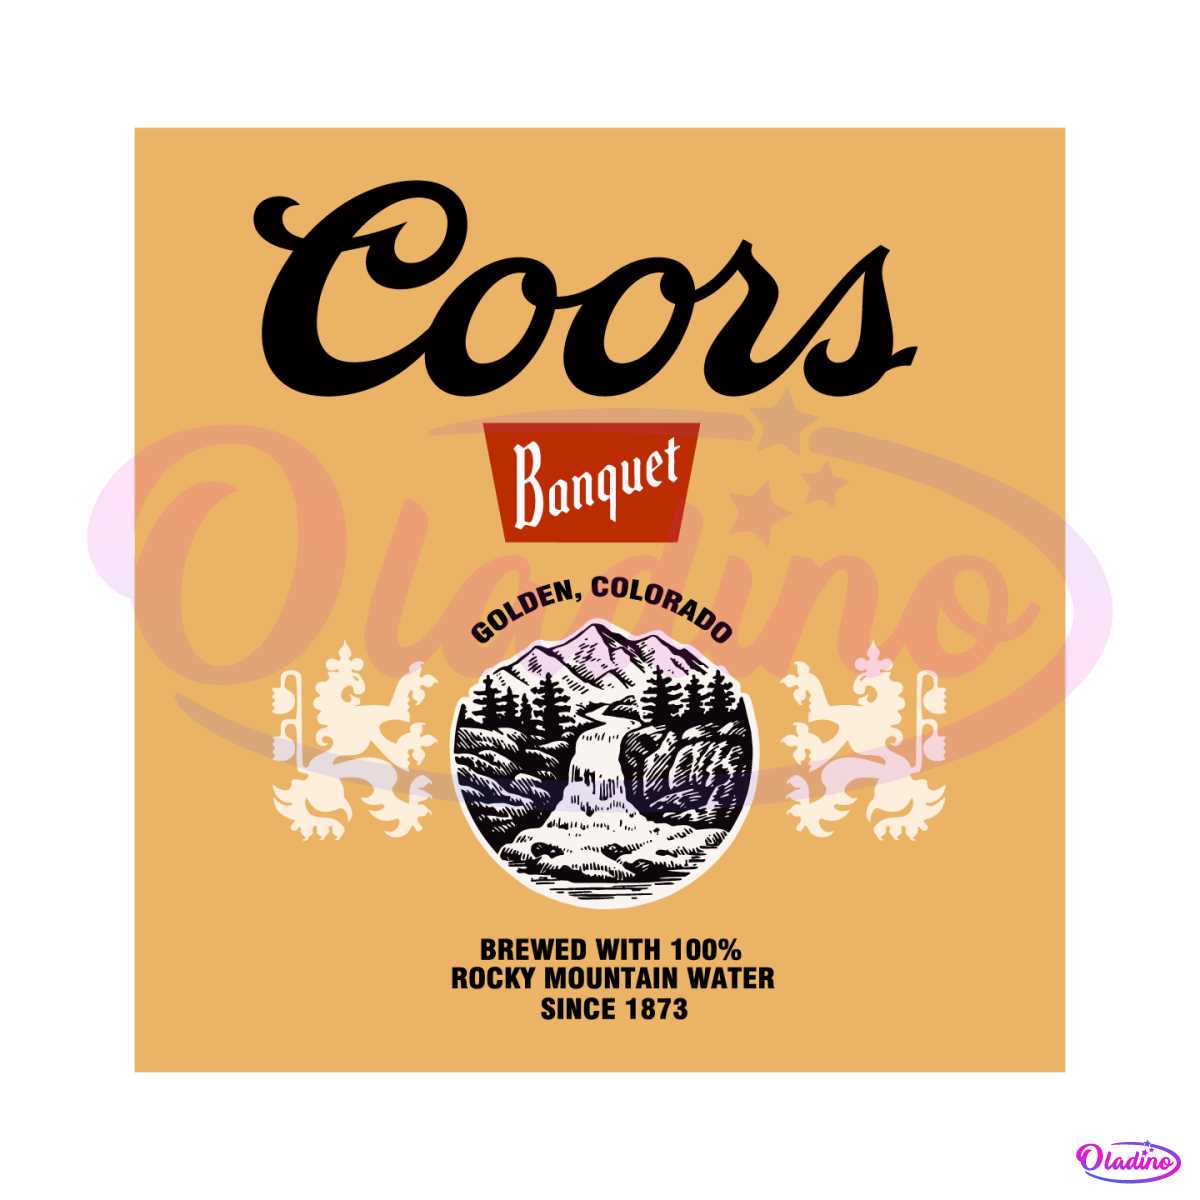 Coors Banquet Golden Colorado Since 1873 SVG Cutting File - Brand SVG